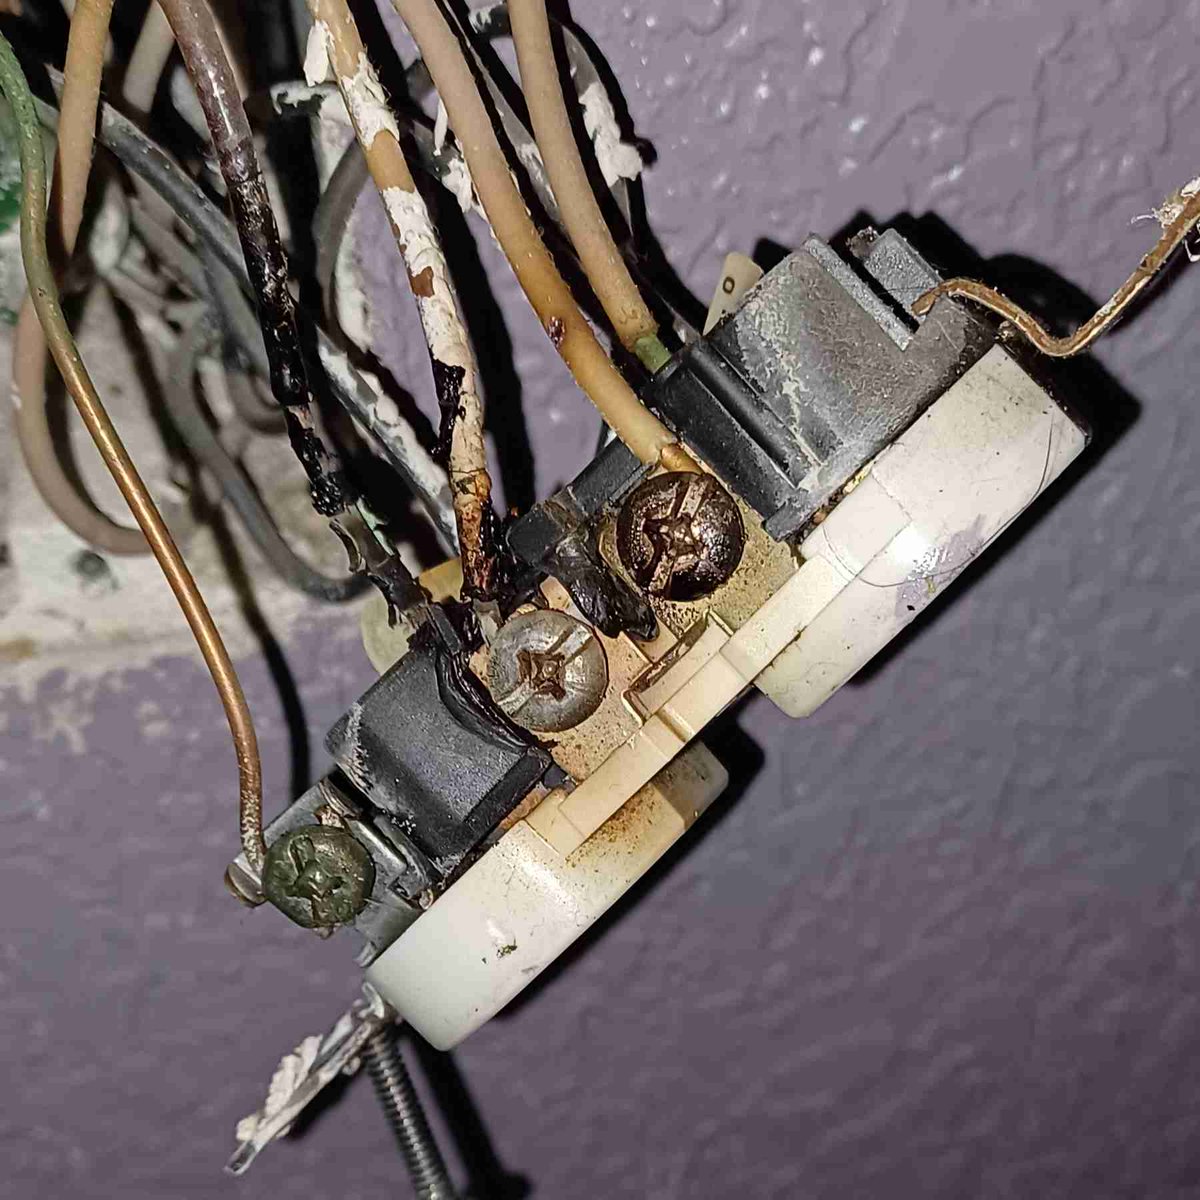 Electrician near me - Thornton, CO

Whether it's a simple repair or a complex installation, we've got you covered. Your satisfaction is our priority!

#ElectricianThornton #LocalElectrician #ElectricalServices #ThorntonCO #QualityWorkmanship